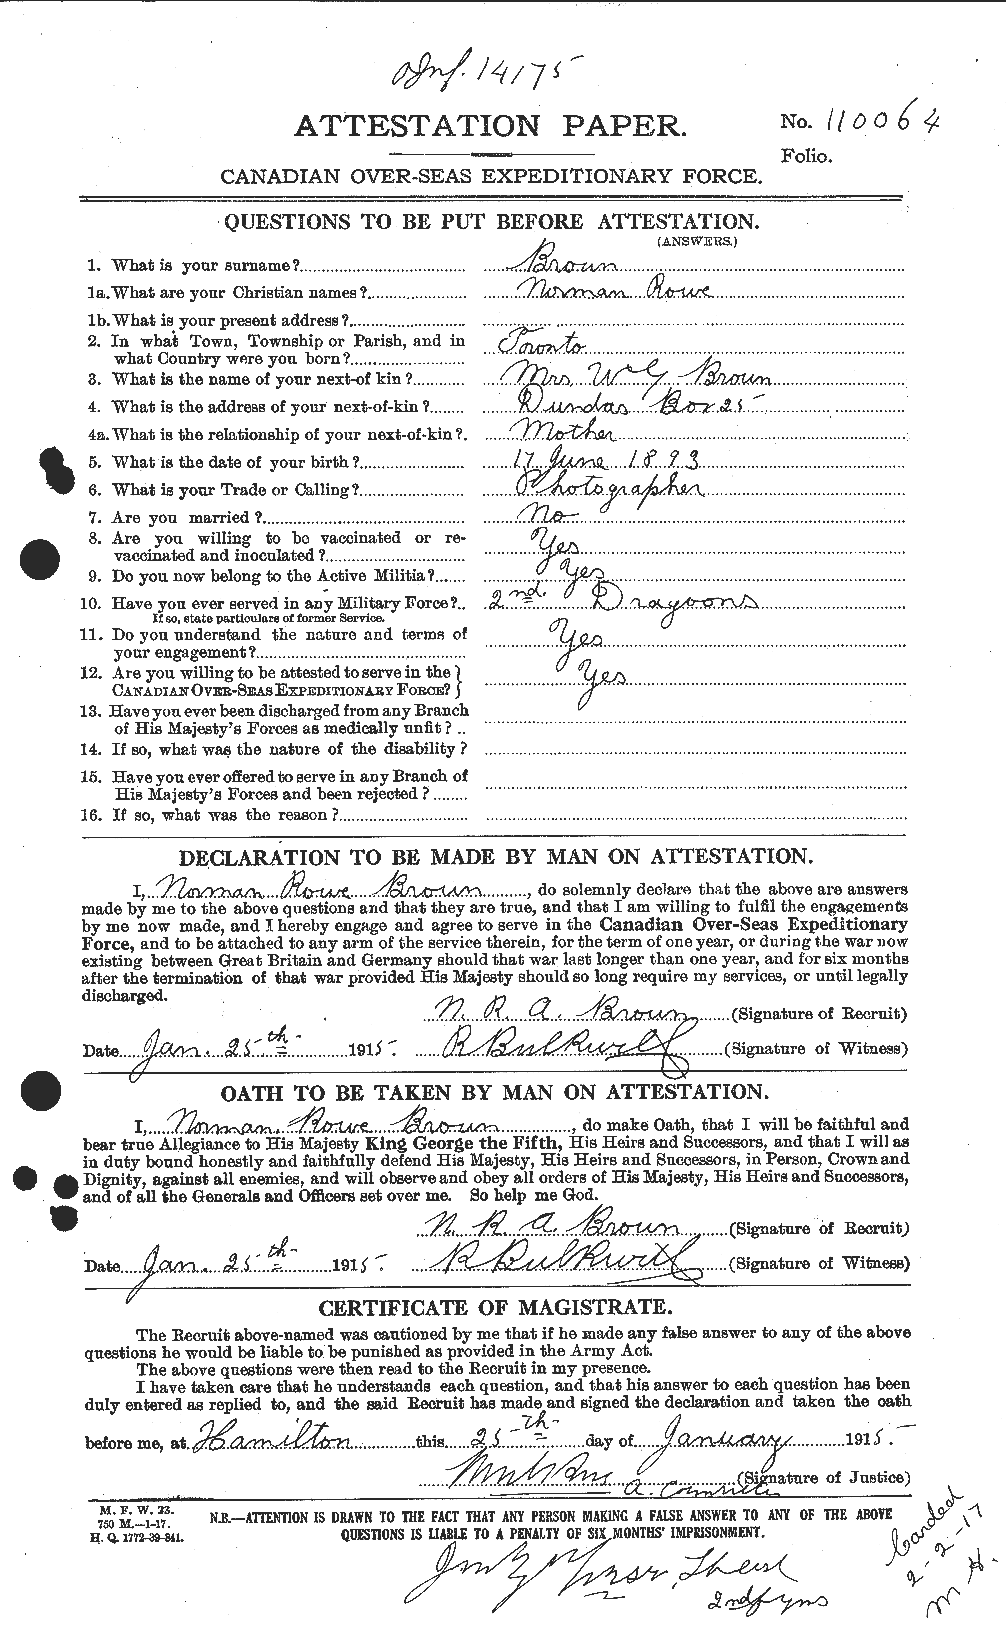 Personnel Records of the First World War - CEF 267117a